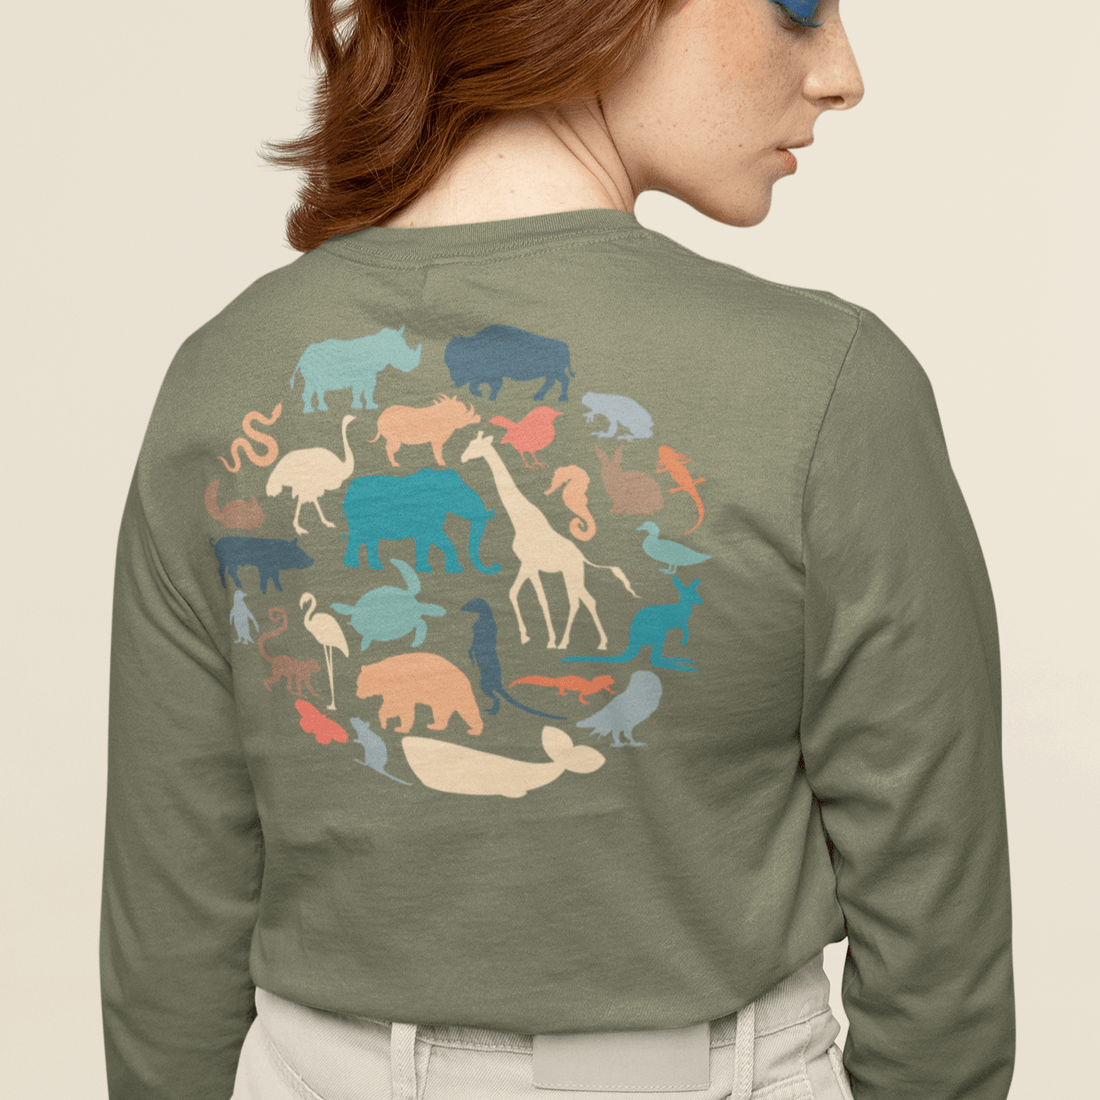 Woman wearing green long sleeve with pattern of animals in a circle on back of shirt